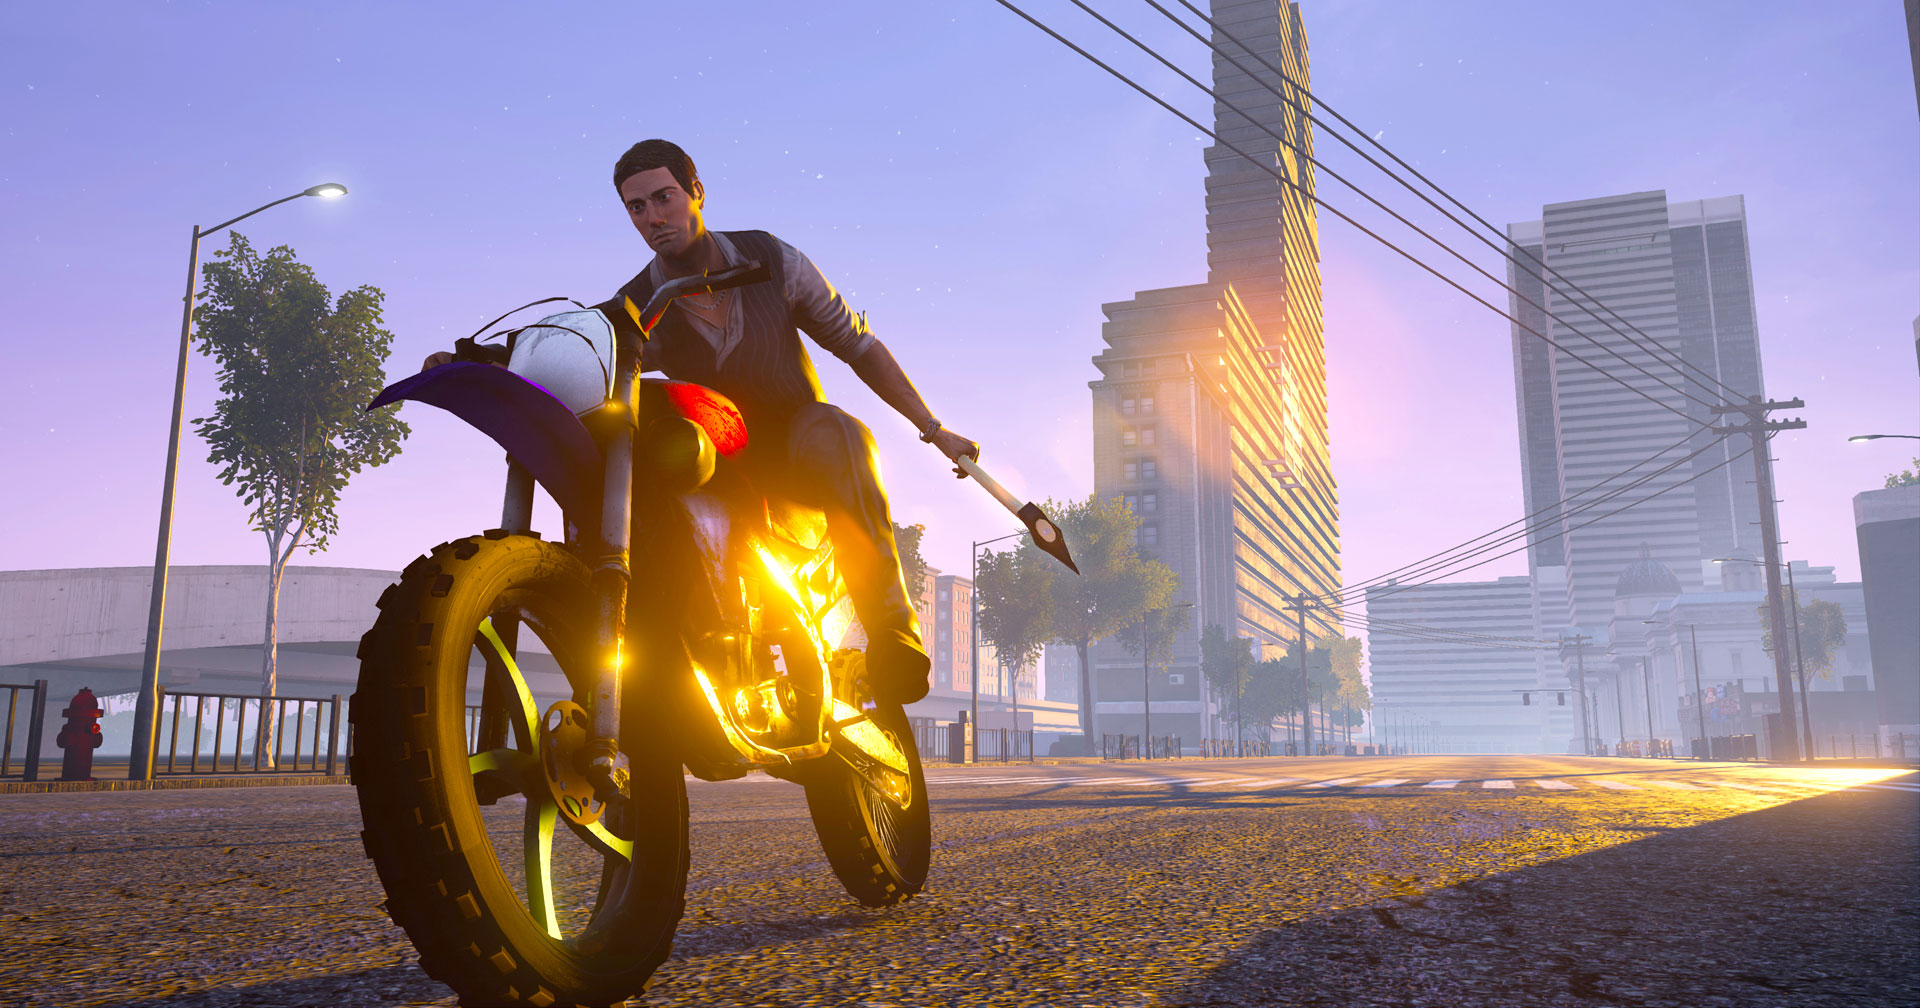 Motorcycle combat game Road Rage riding onto PS4, Xbox One and PC this